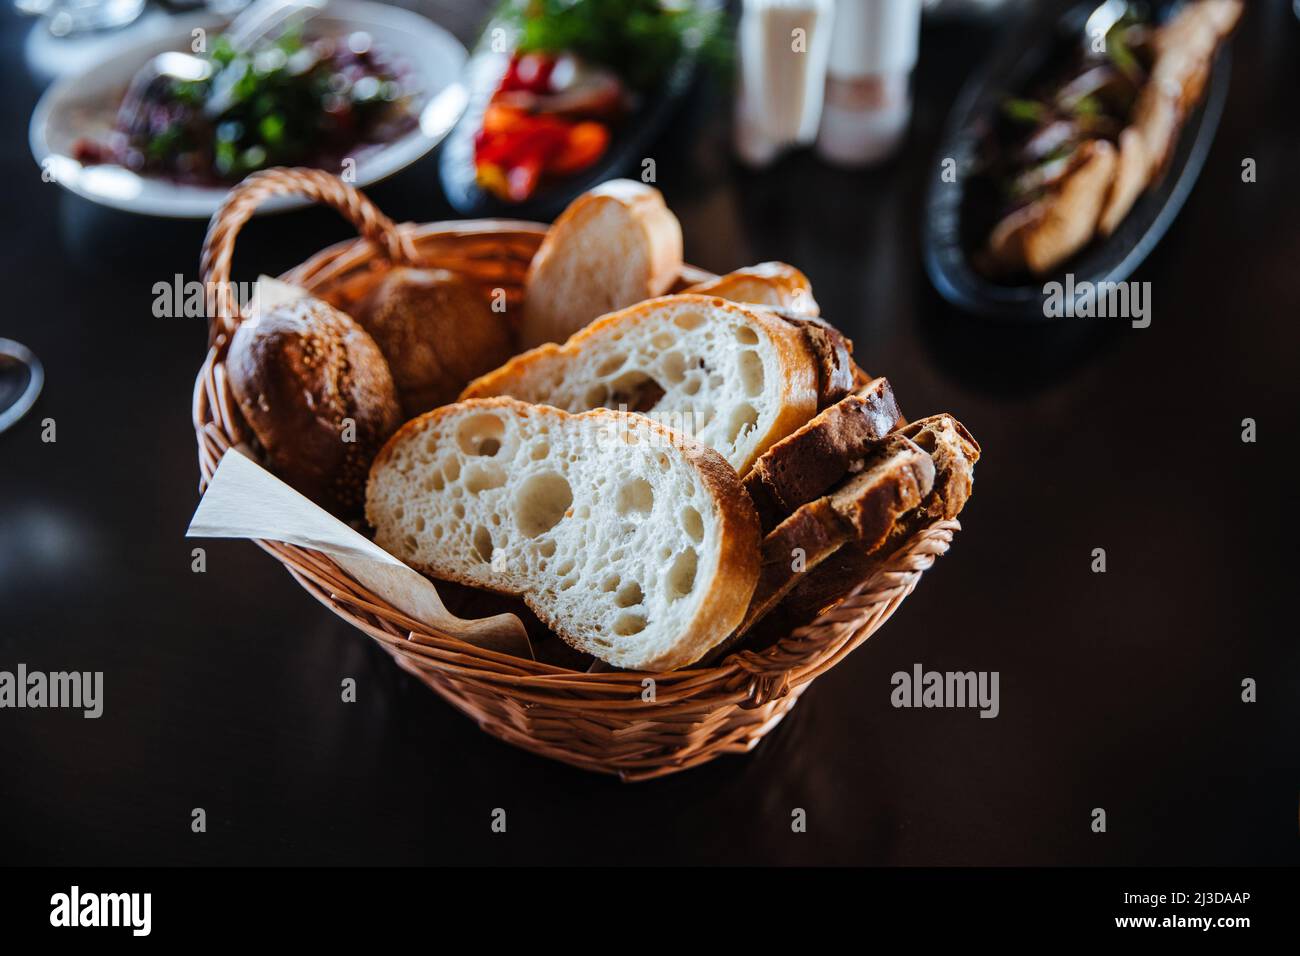 Different types of bread in the basket on the table in the interior of the restaurant. Stock Photo